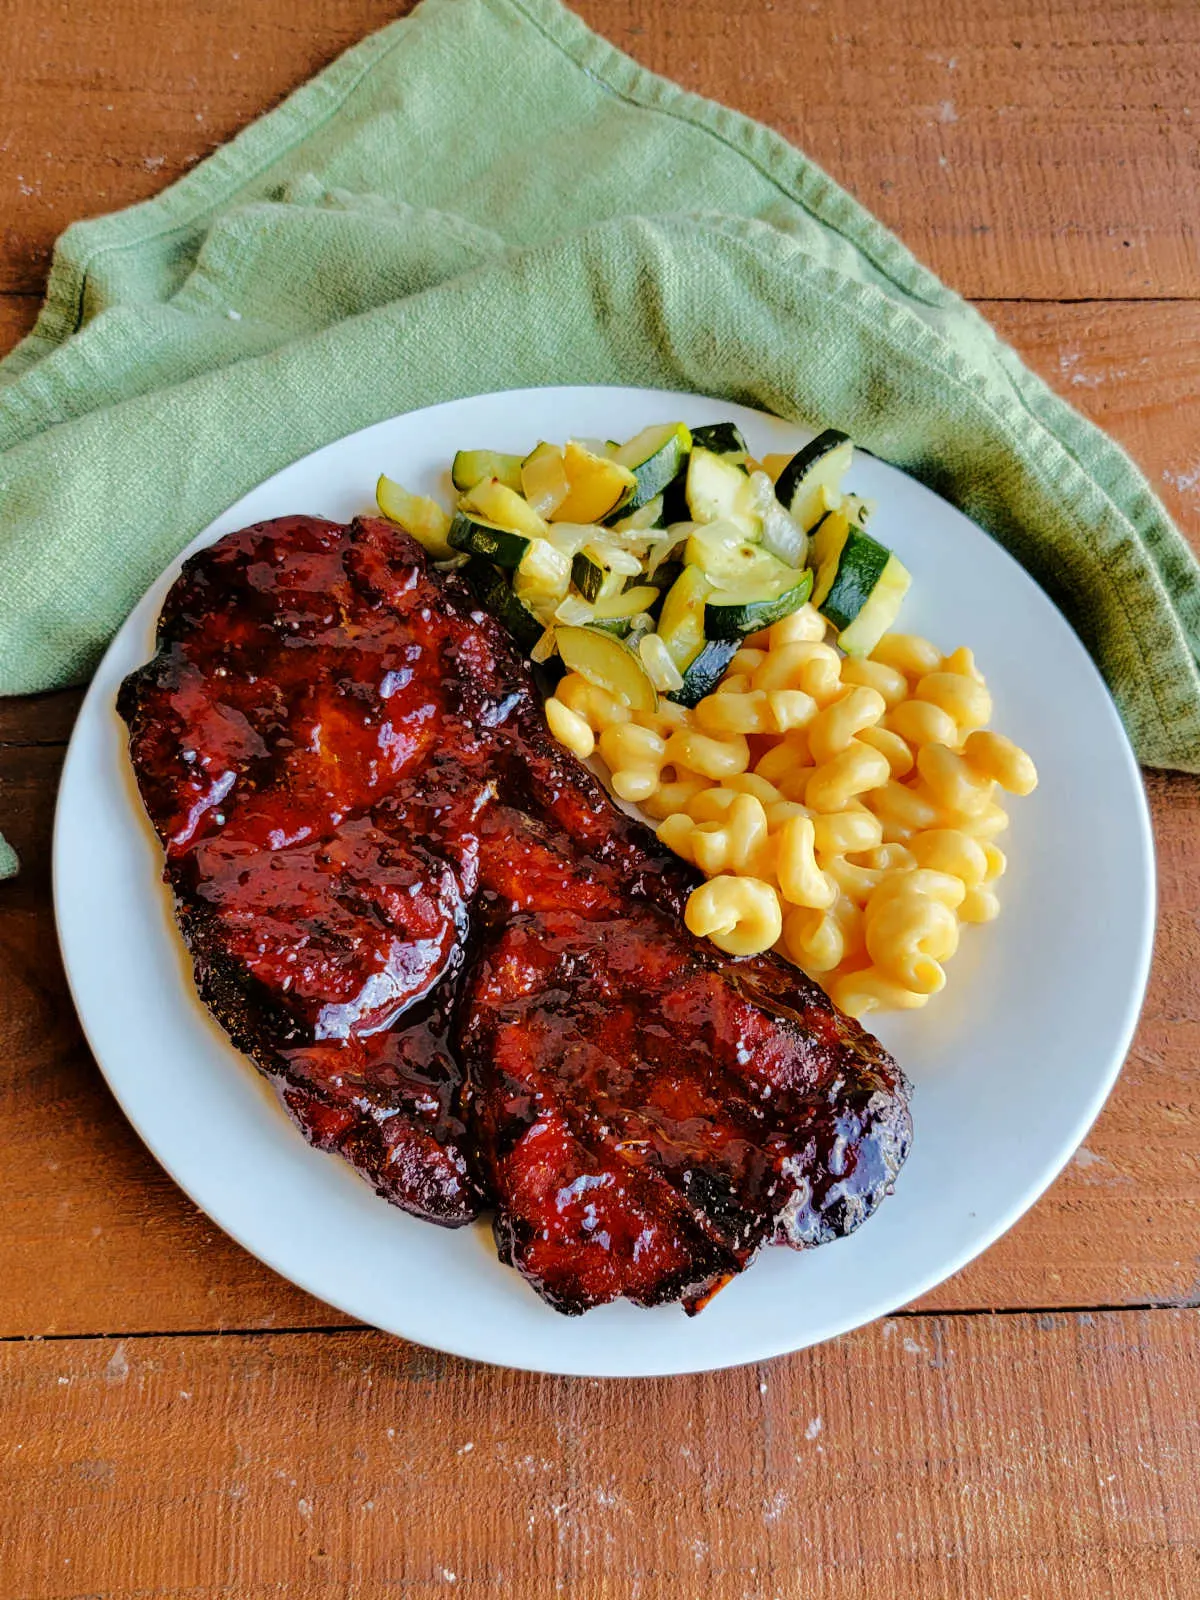 Plate with a large bbq pork steak, macaroni and cheese, and zucchini.